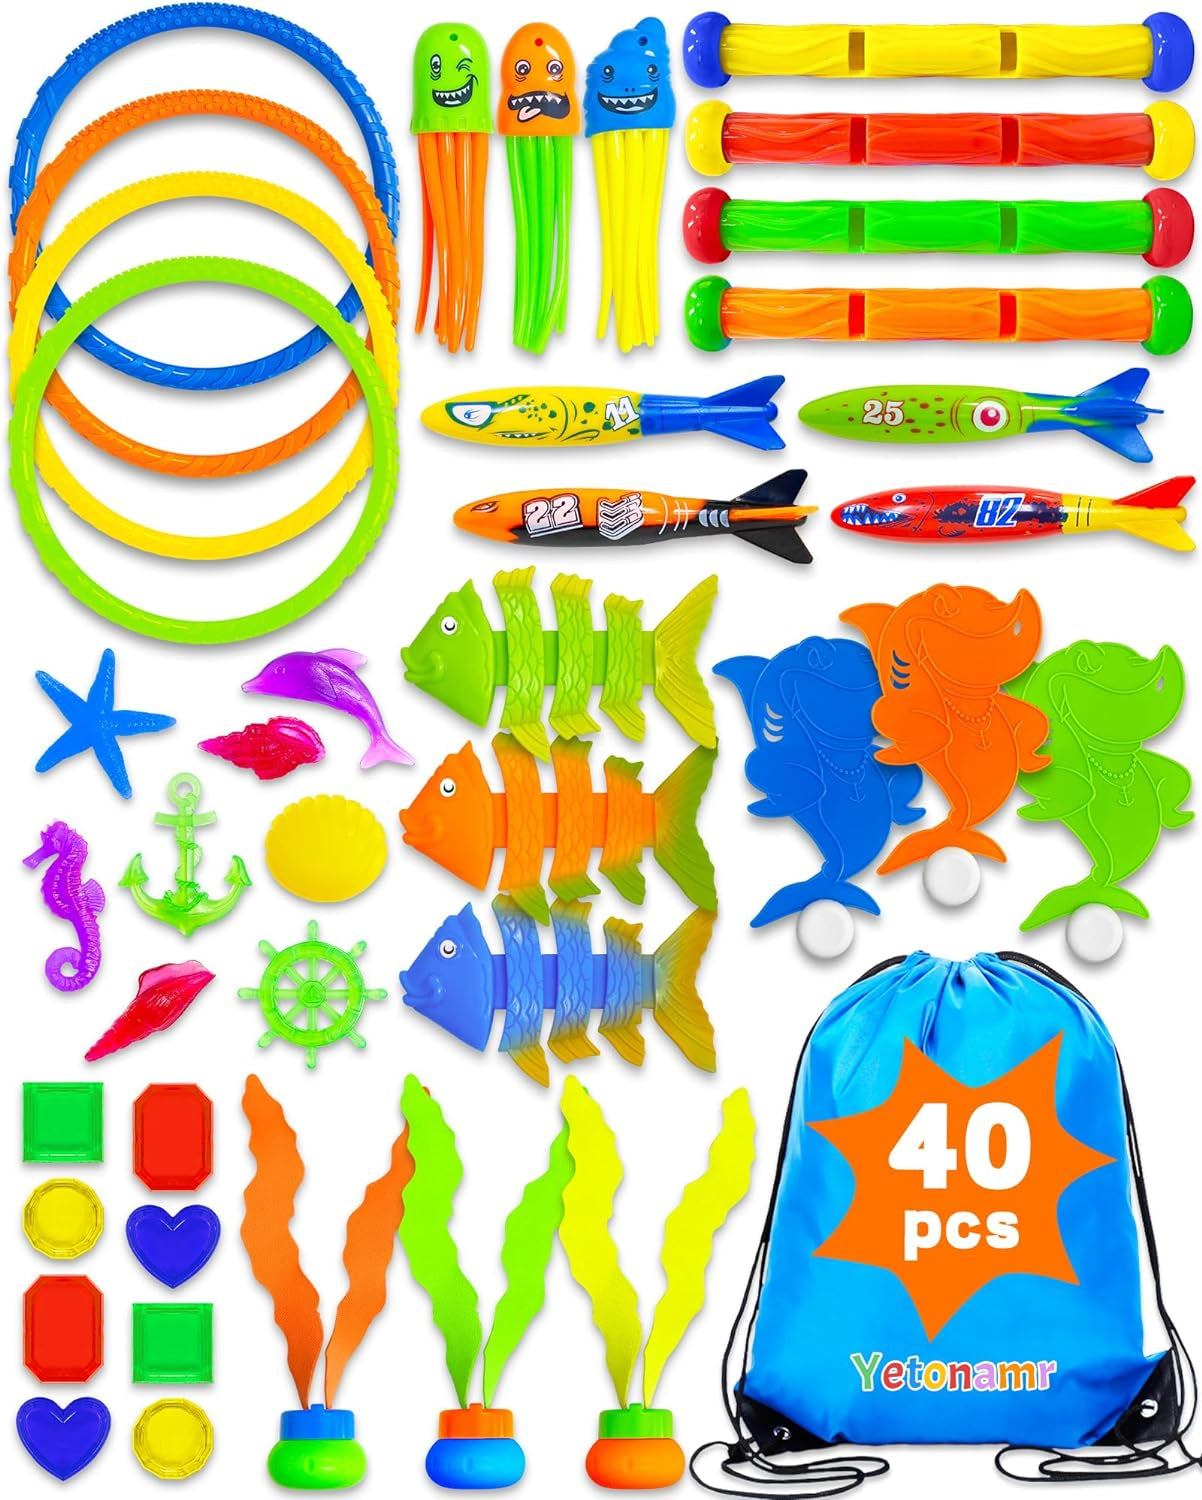 30 Pcs Pool Toys for Kids Ages 3-5, 4-8, 8-12, Pool Games Diving Toys Swimming Pool Toys Sets with Storage Bag Toddler Gifts Pool Bath Toys Water Swim Toys for Boys Girls